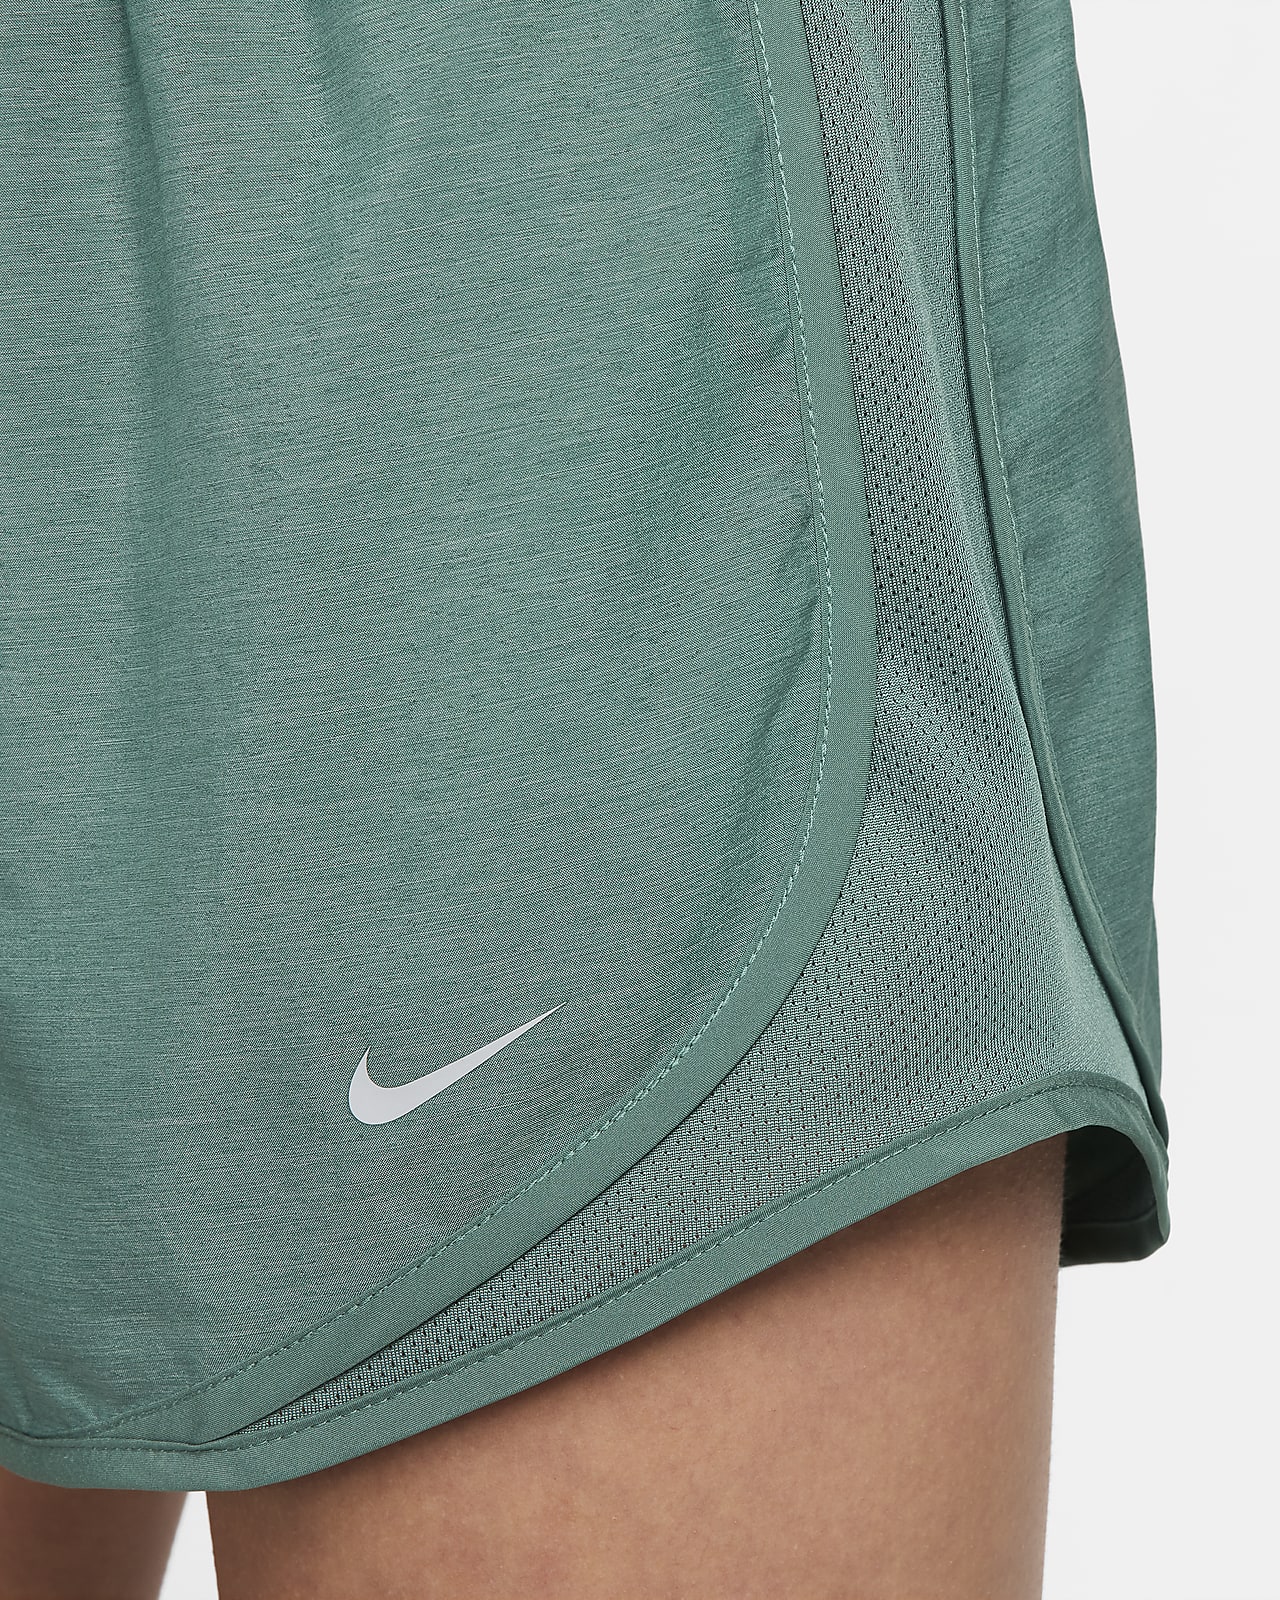 Nike Mens Tempo Split 2 Running Shorts with an internal brief liner Small